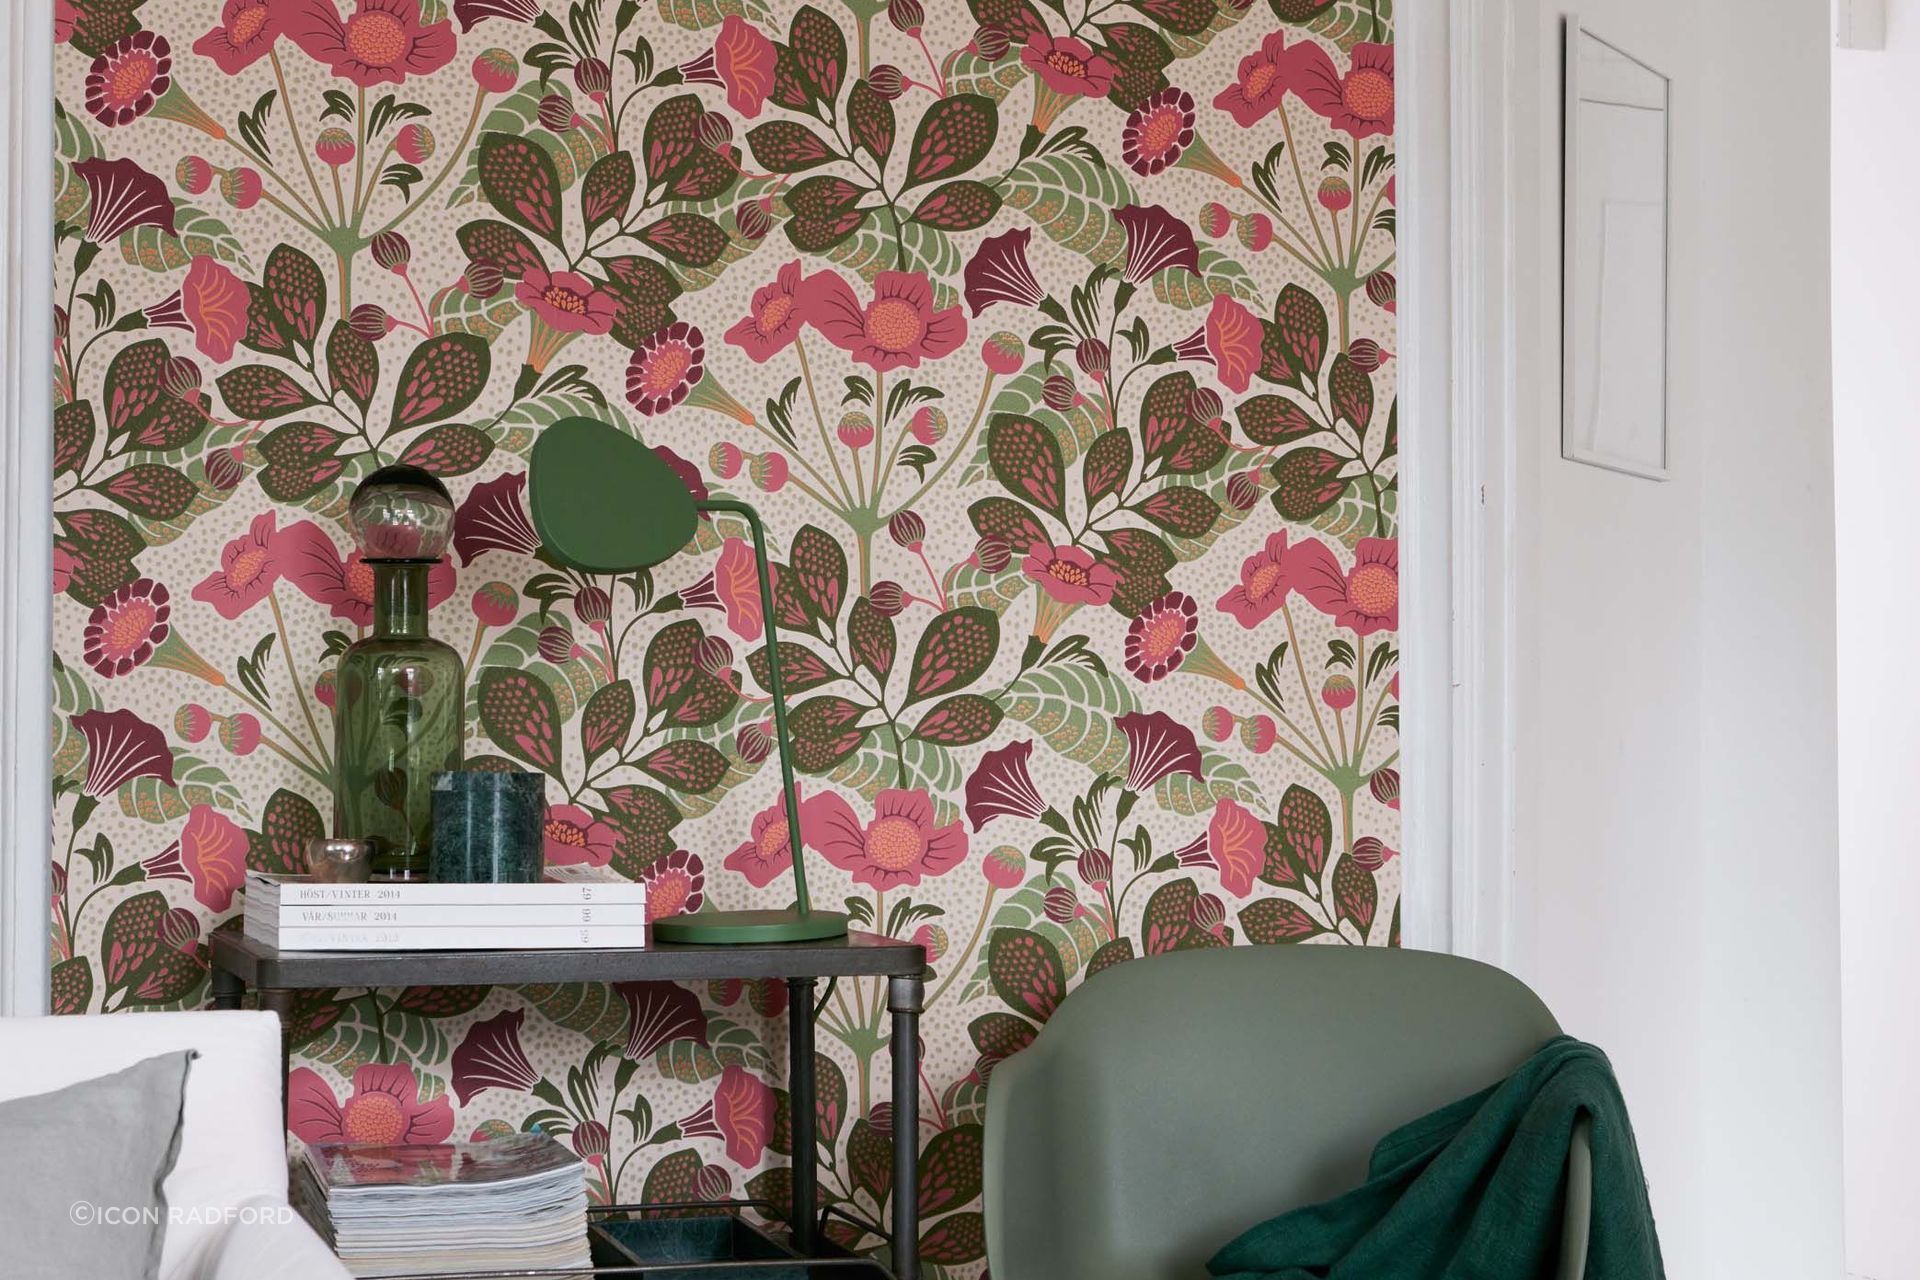 Floral designs are very popular wallpaper choices among homeowners.